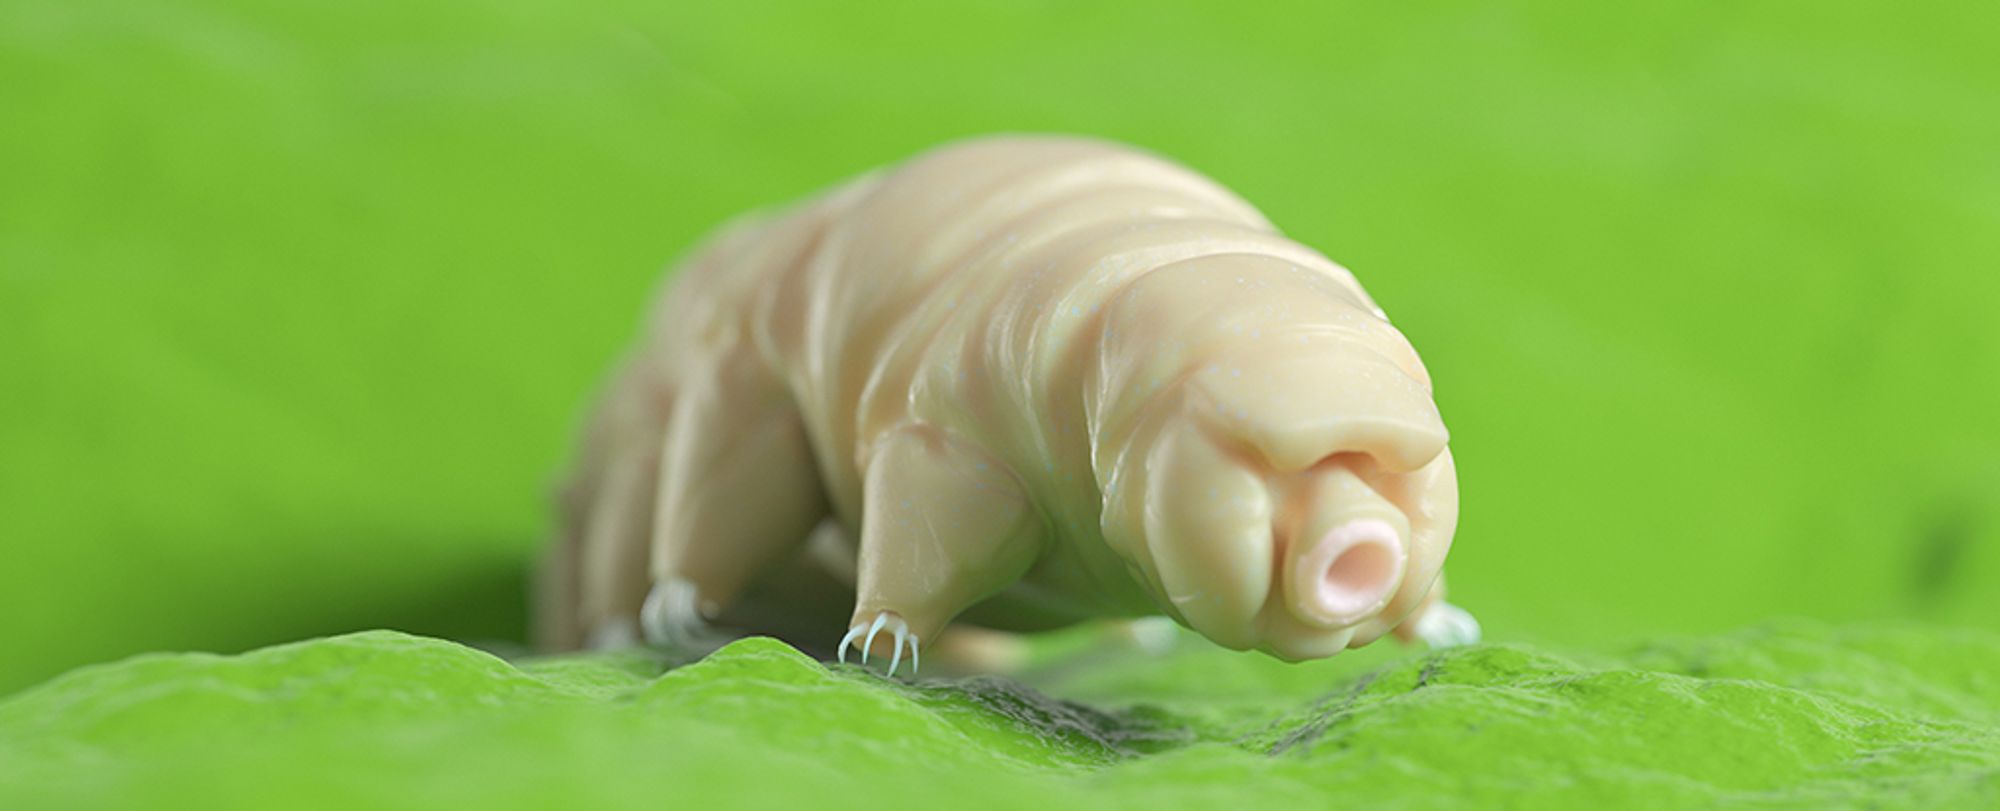 Scientists Put Tardigrade Proteins Into Human Cells. Here's What Happened.